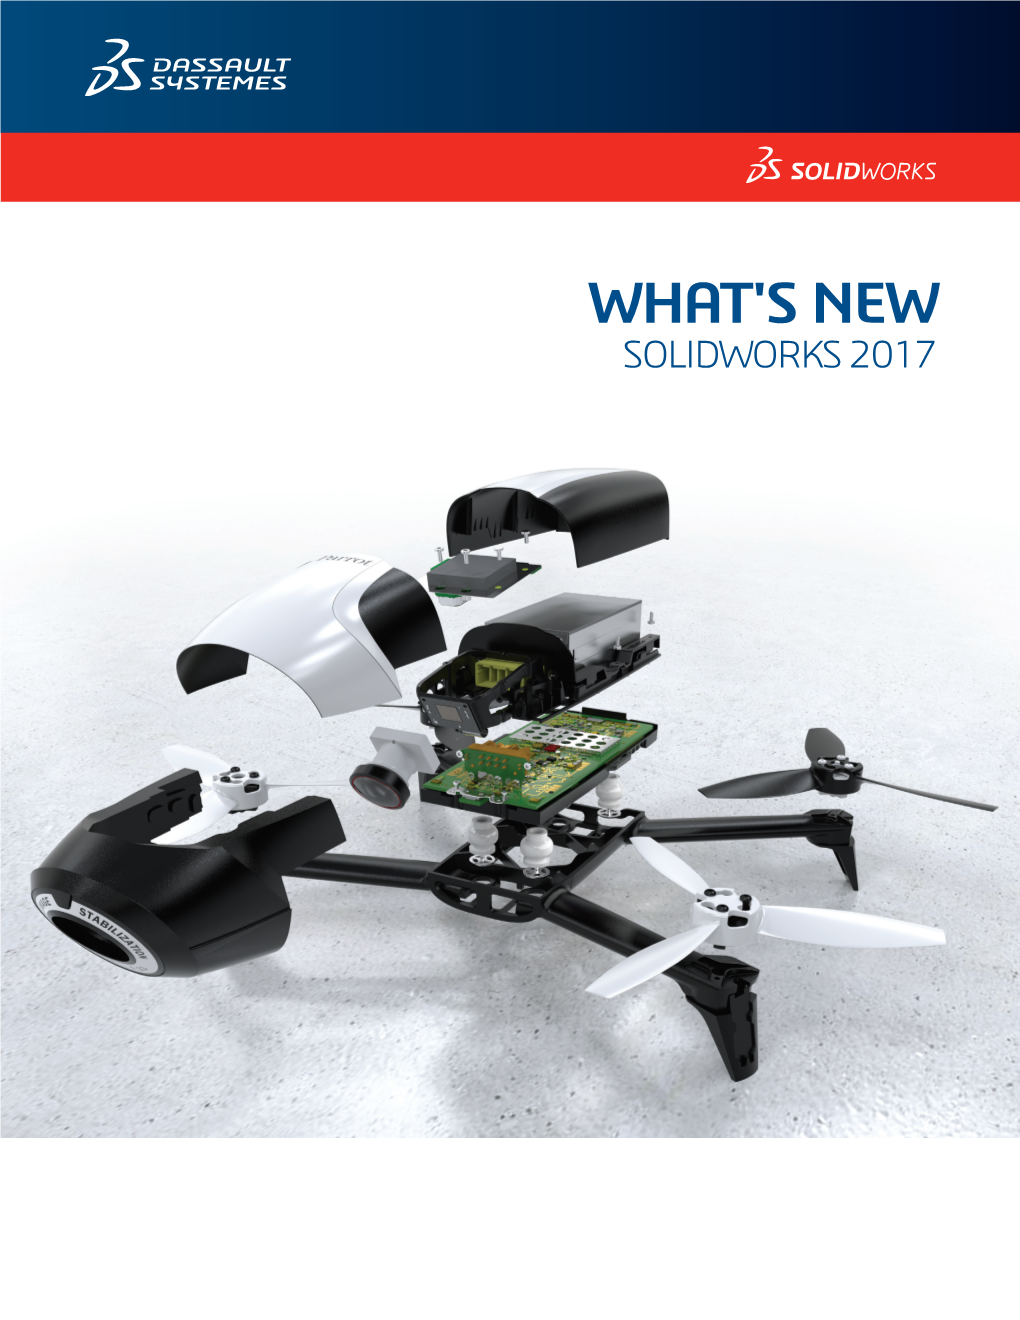 WHAT's NEW SOLIDWORKS 2017 Contents